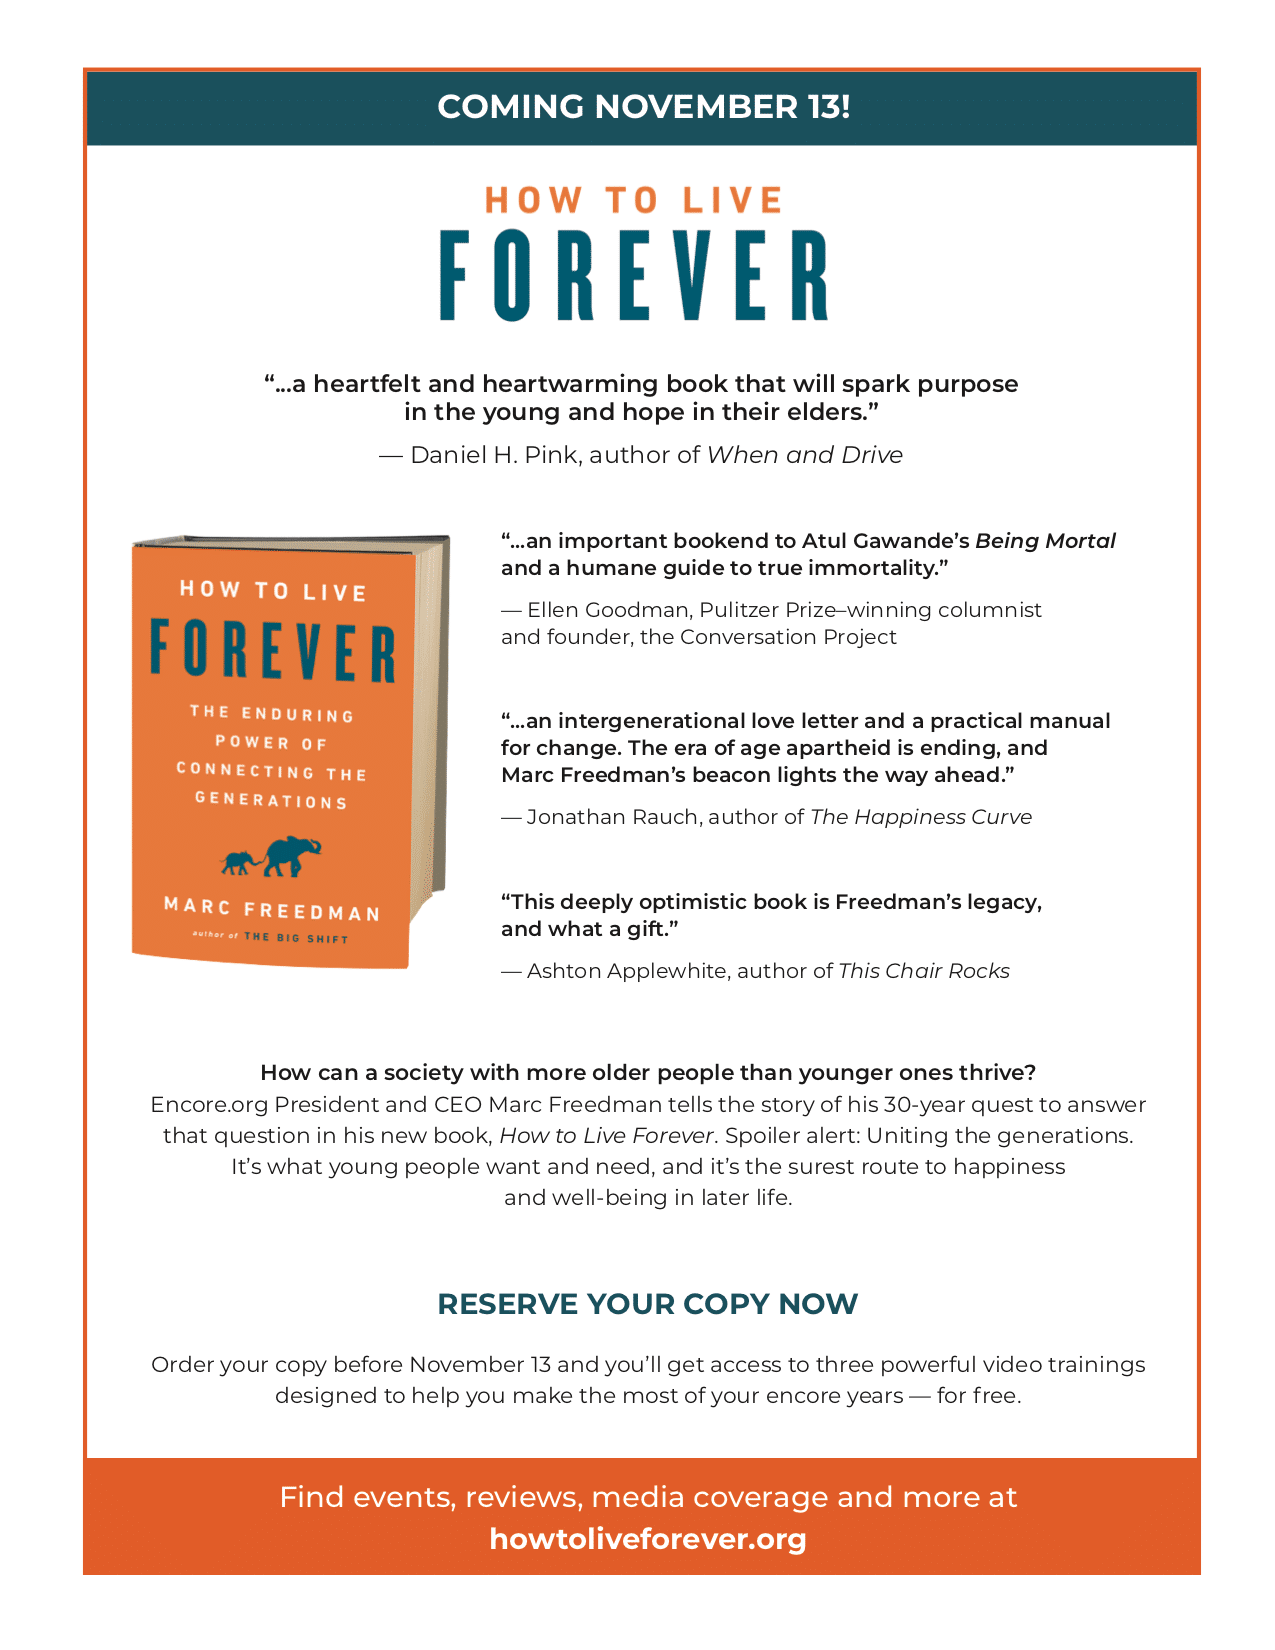 How To Live Forever Spread The Word Encore Org